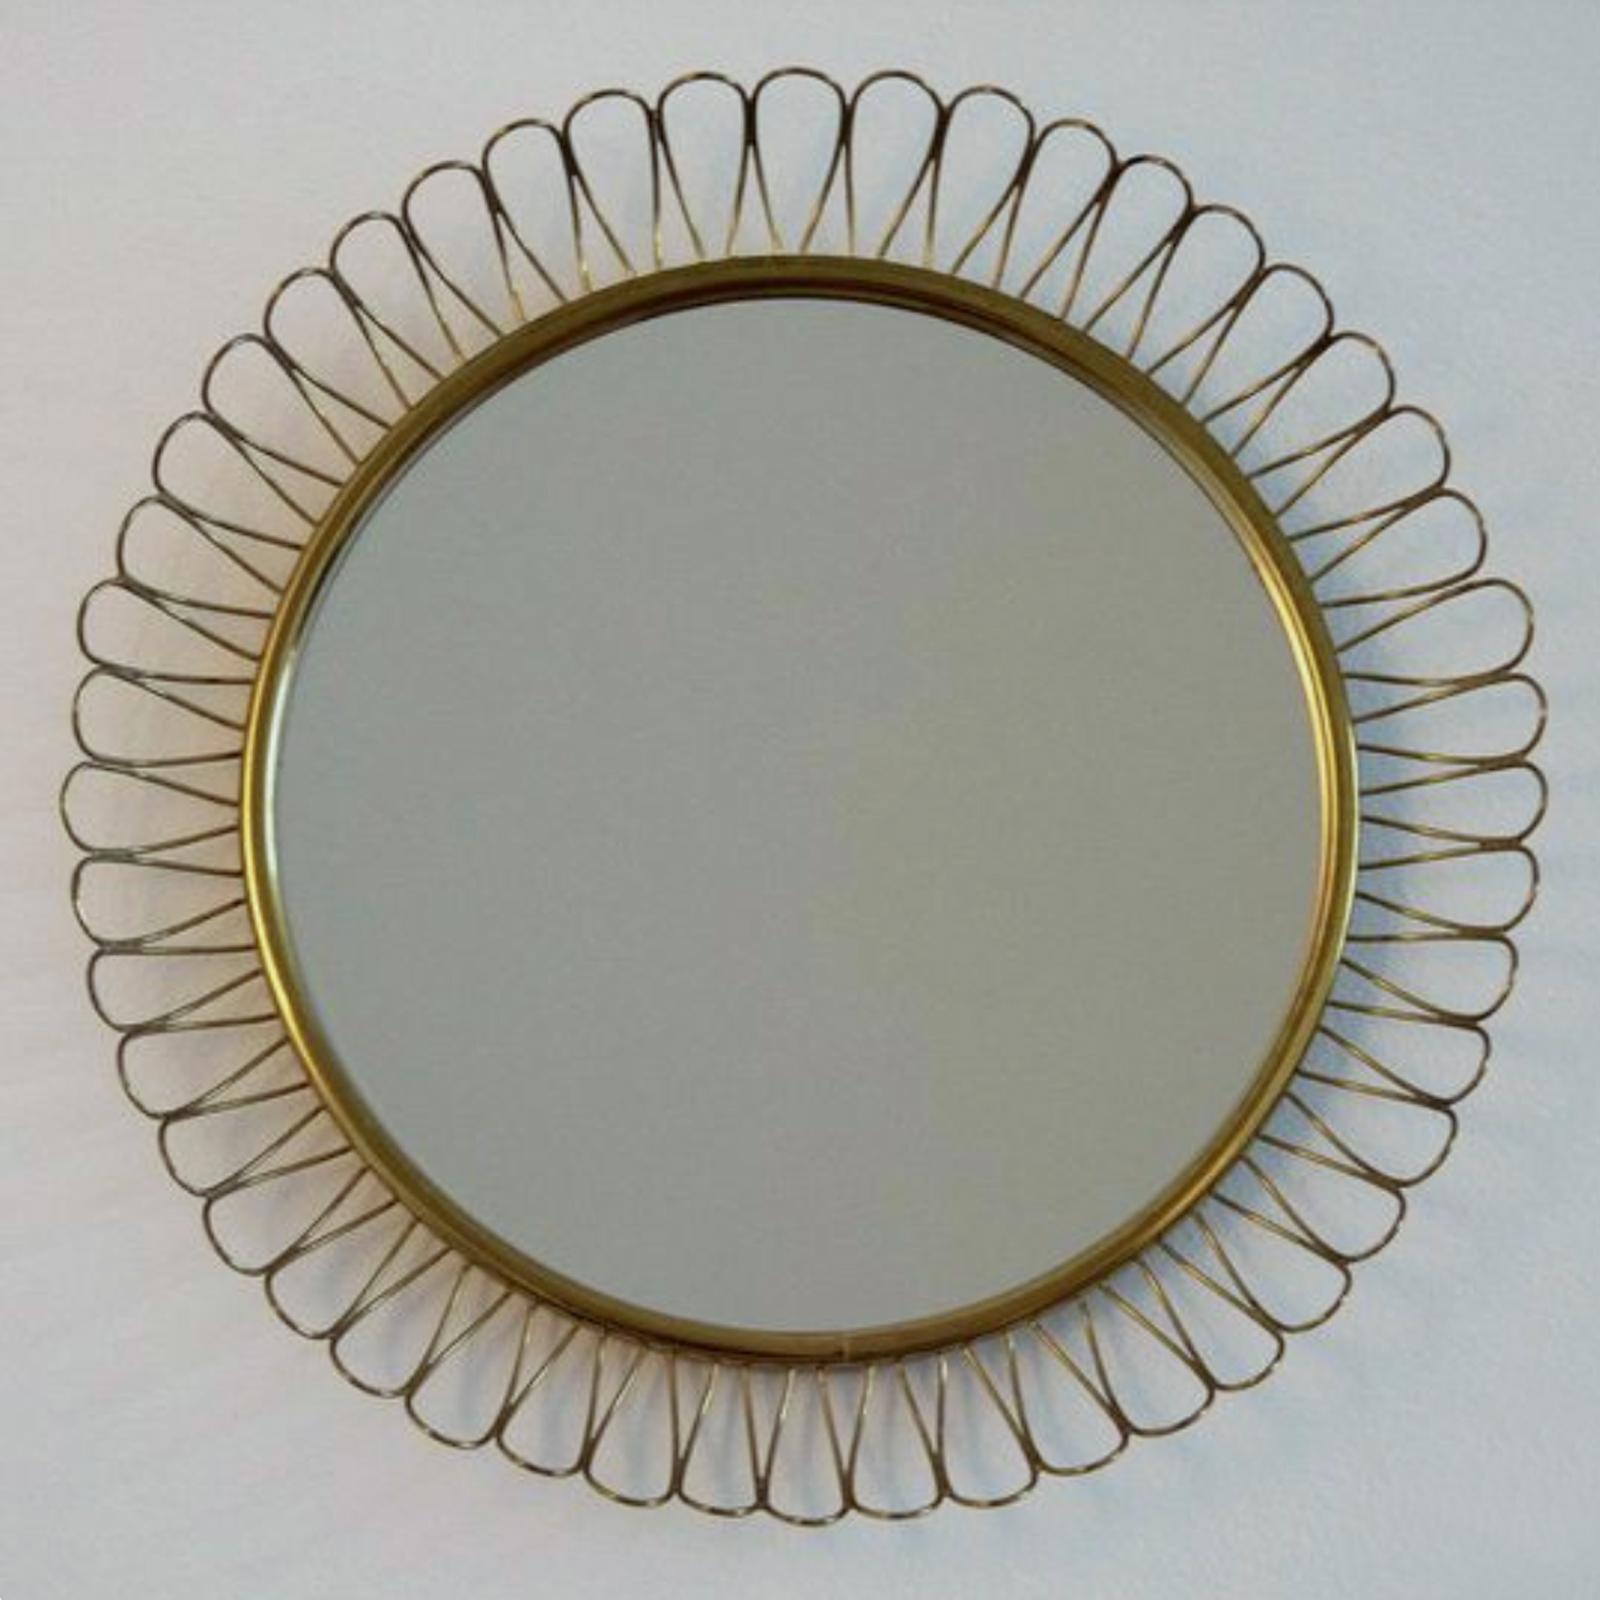 This beautiful brass loop wall mirror was designed and manufactured in Sweden in the 1950s. The brass frame with nice warm vintage patina. The mirror glass somehow cloudy due to age. 

Measures: Diameter app.: 12.2